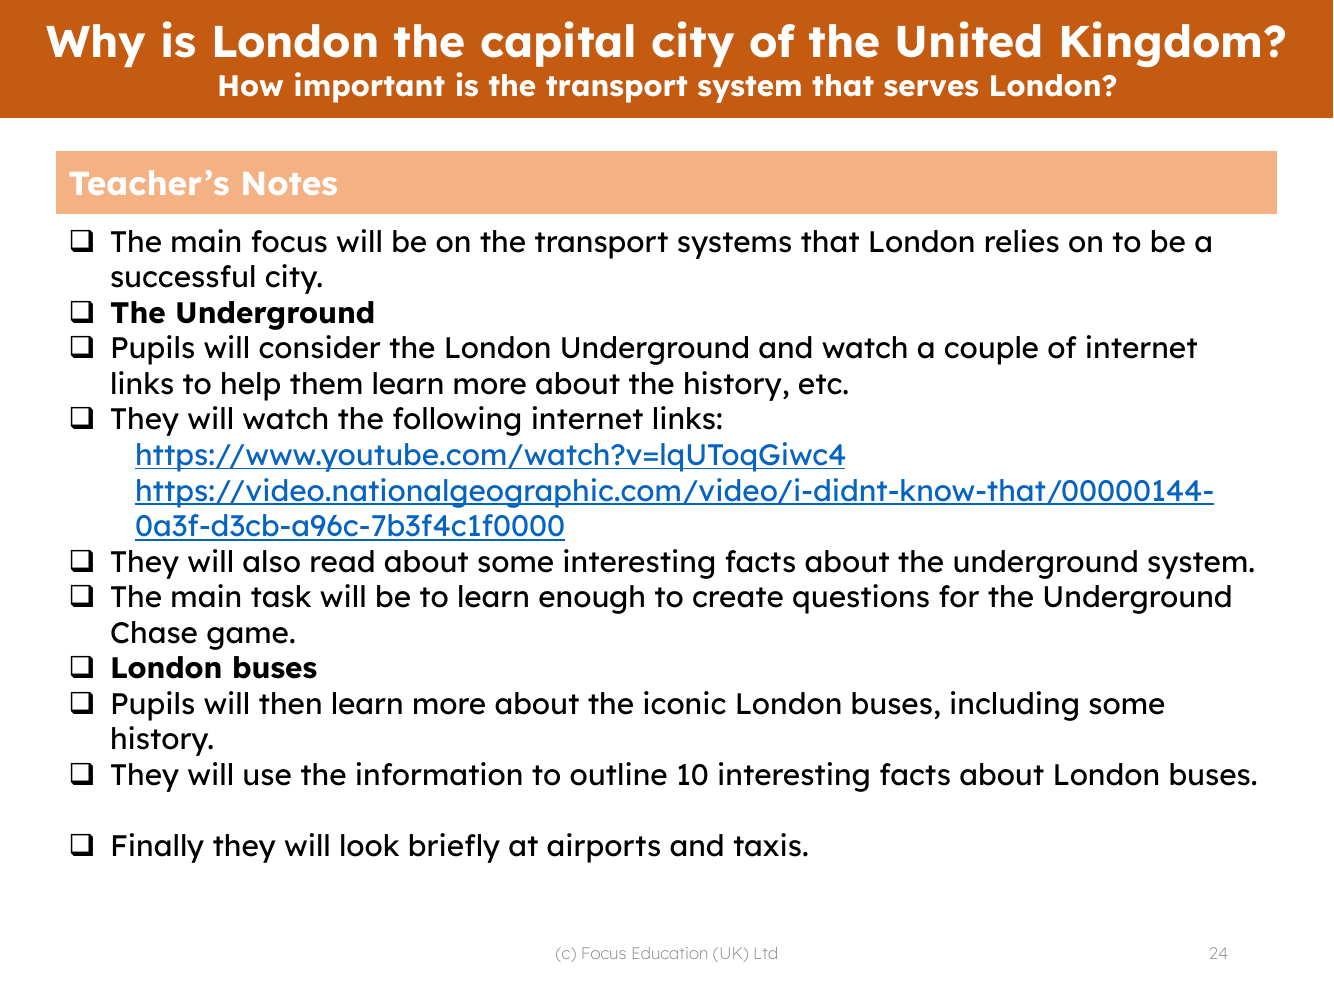 How important is the transport system that serves London? - Teacher notes